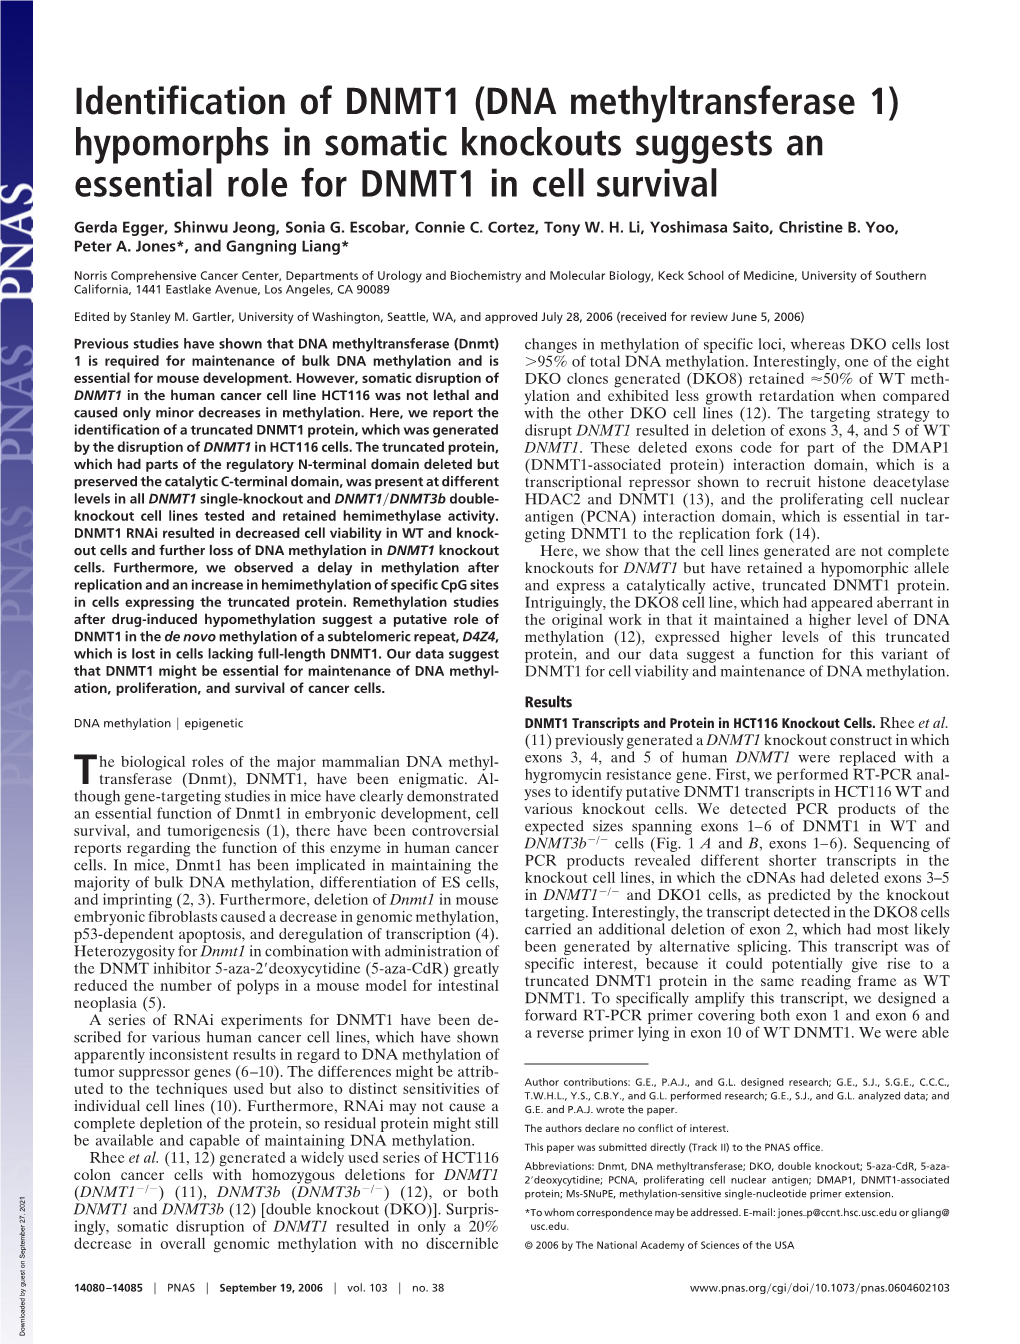 Identification of DNMT1 (DNA Methyltransferase 1) Hypomorphs in Somatic Knockouts Suggests an Essential Role for DNMT1 in Cell Survival